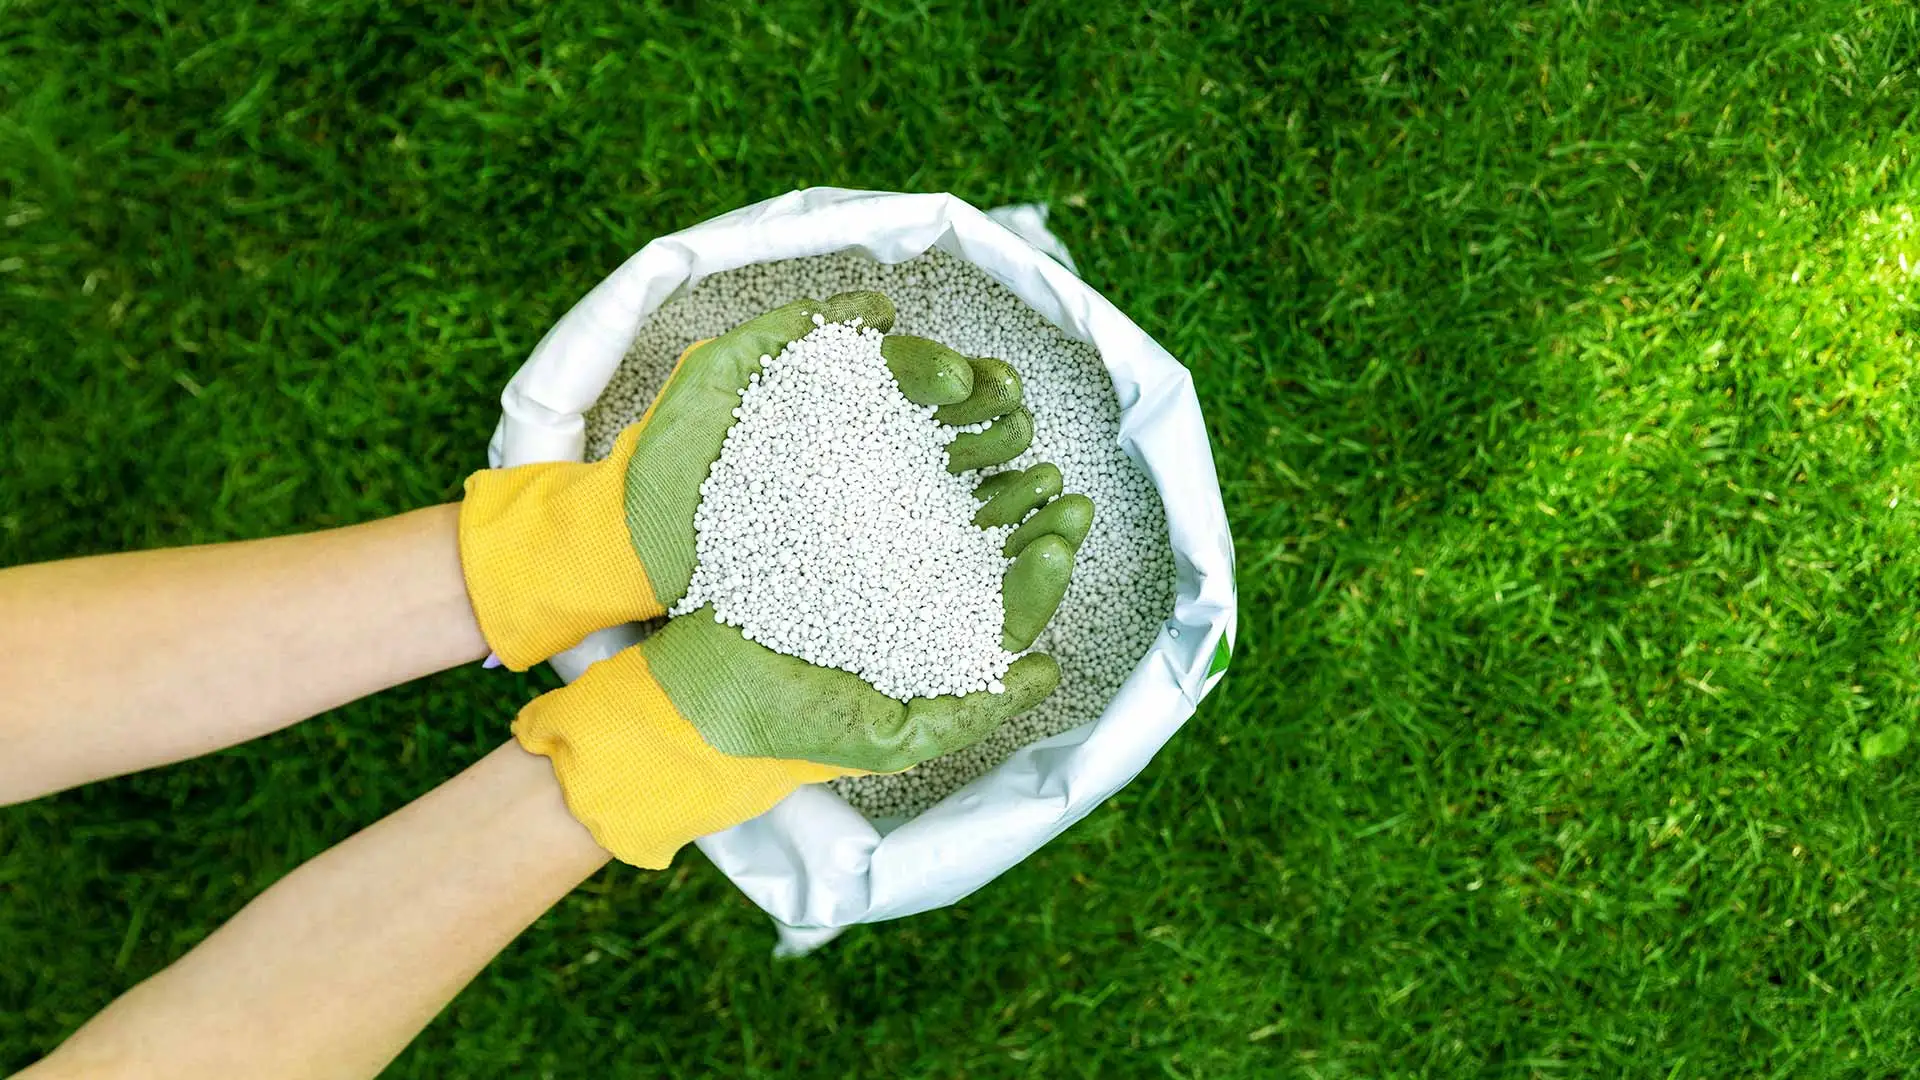 A handful of fertilizer held over a bag on top of lush green grass.